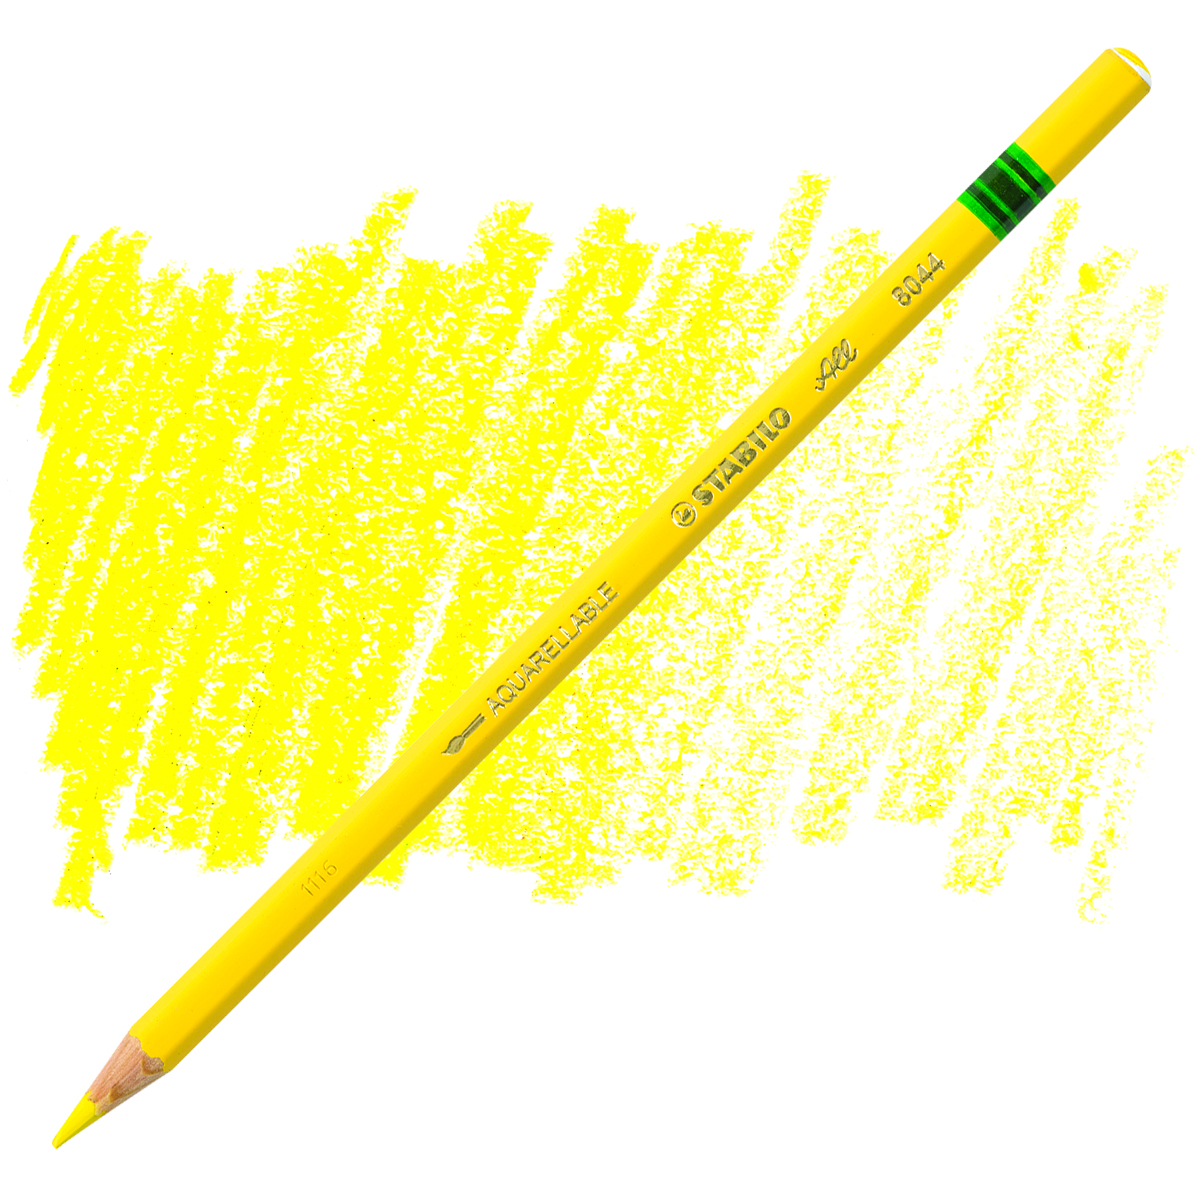 Colorful Pencils and Markers Stock Photo - Image of yellow, black: 20288278